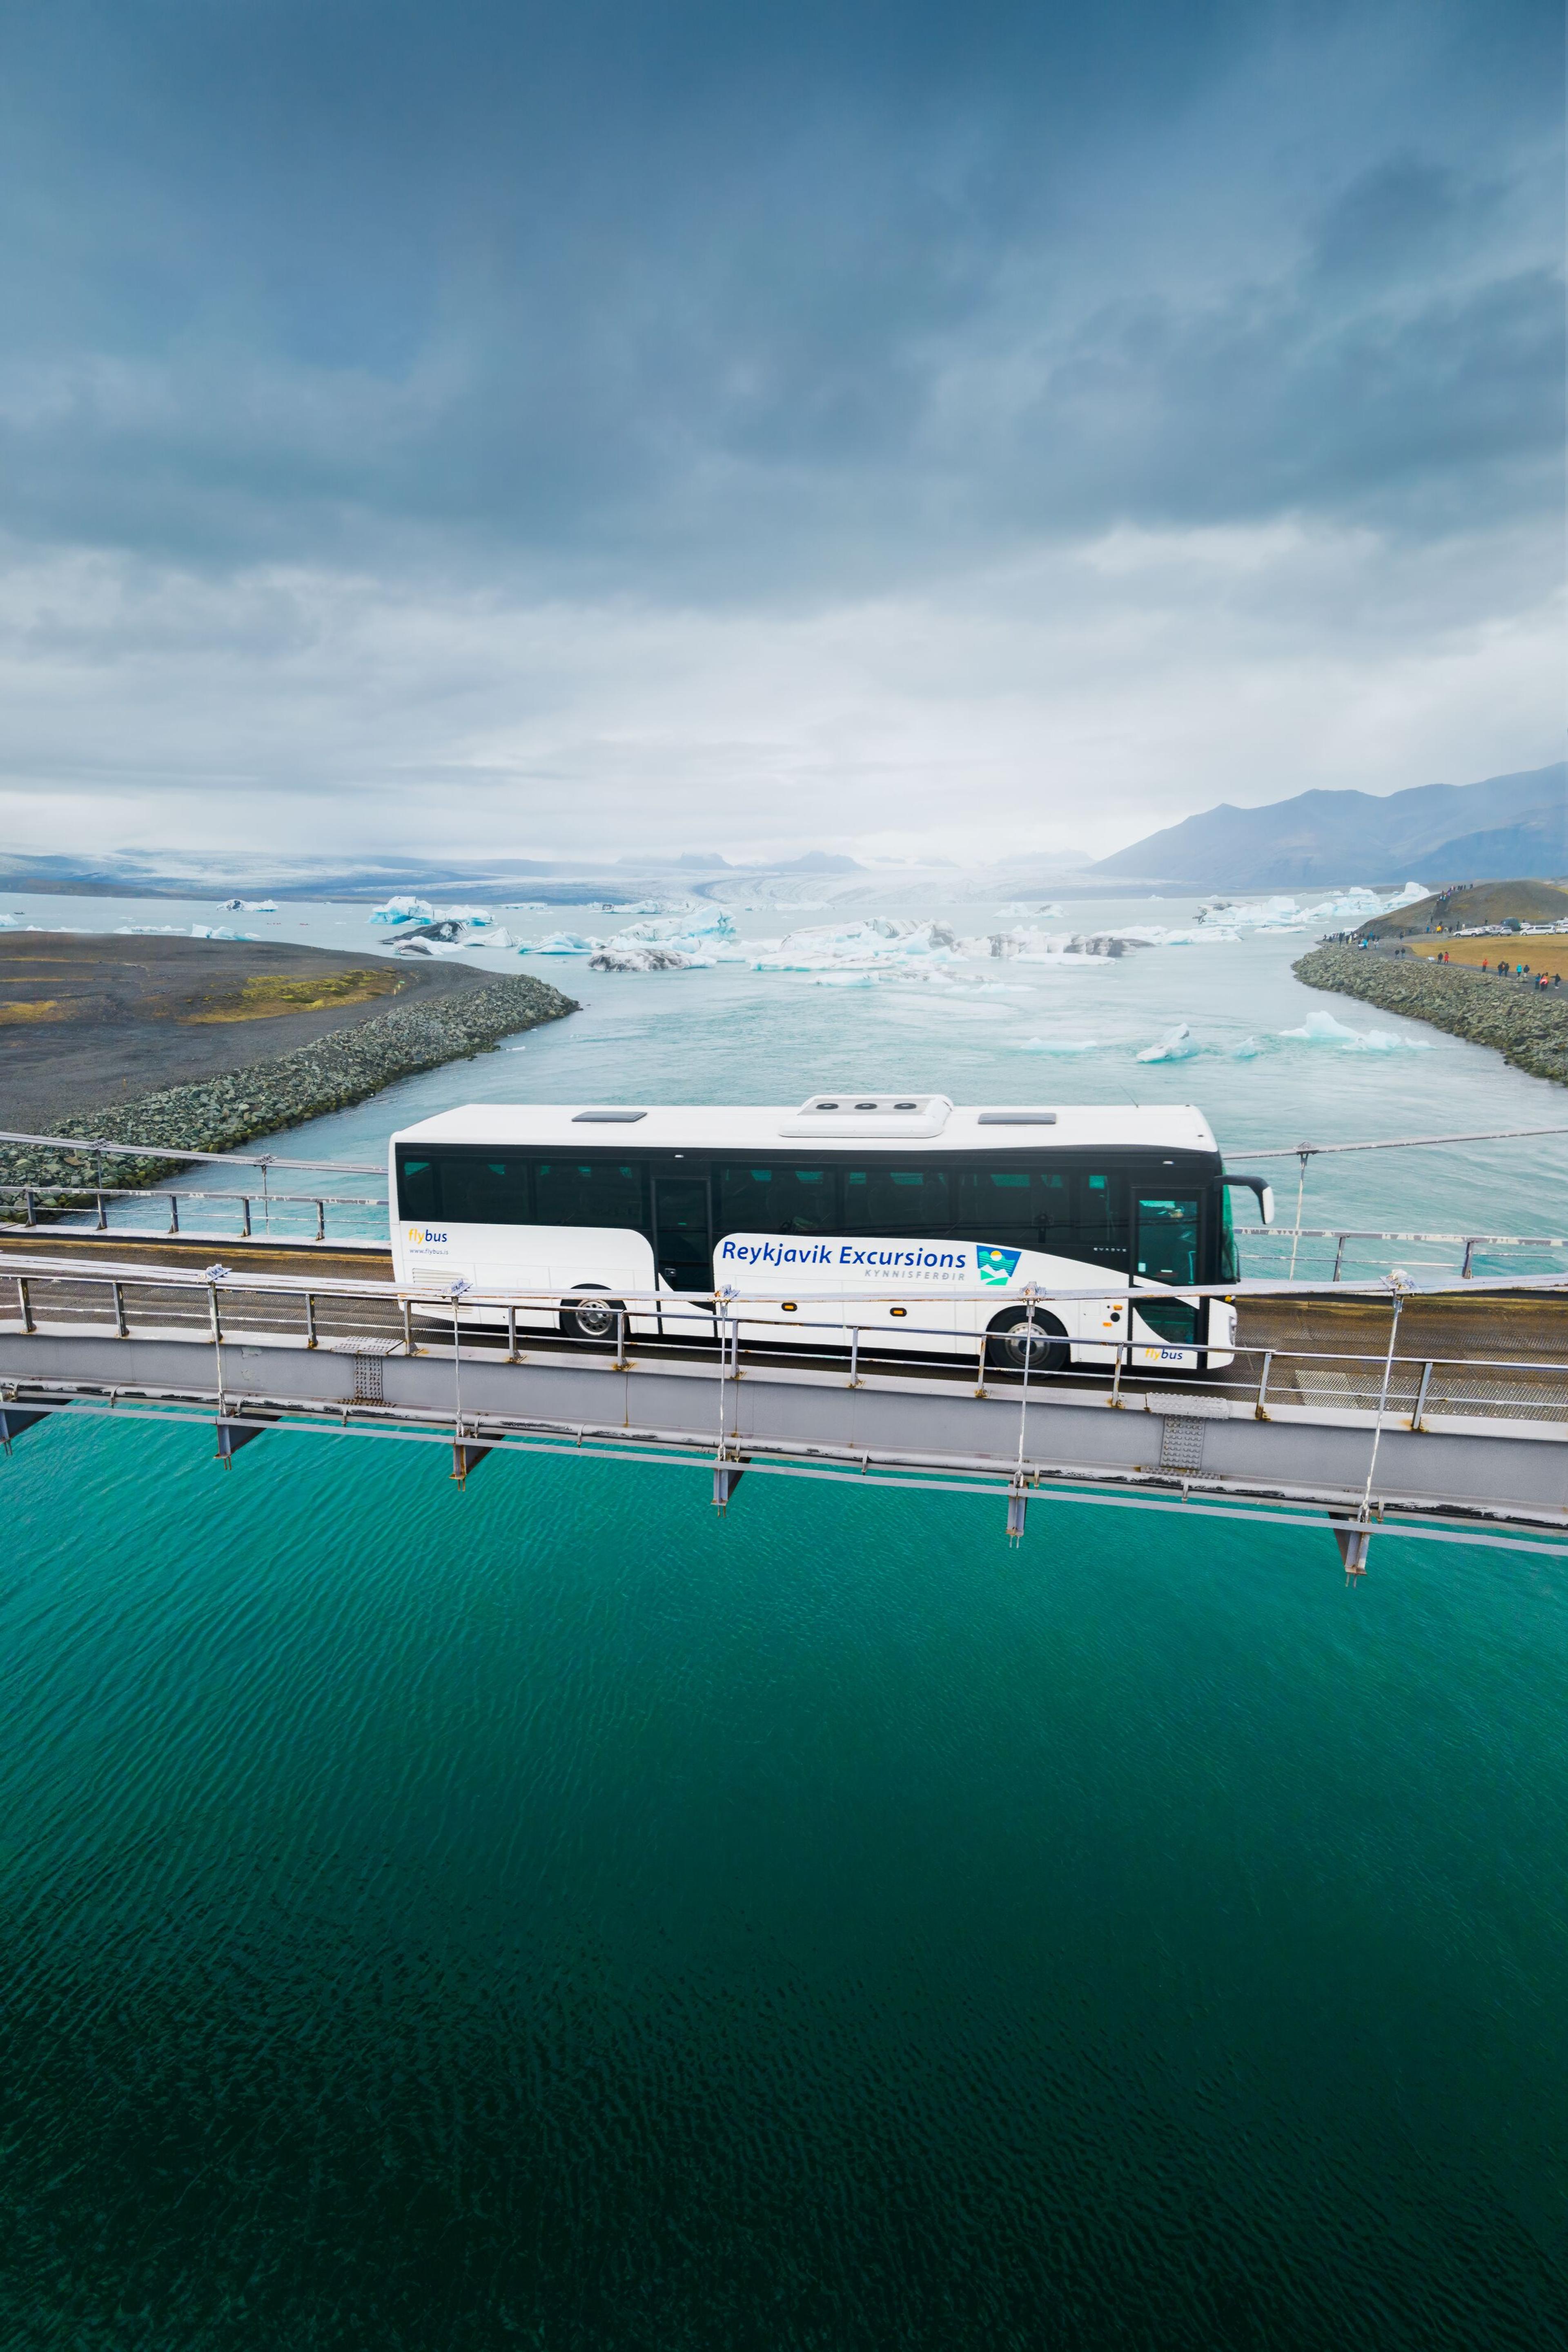 A tour bus from "Reykjavik Excursions" crossing a bridge with a backdrop of glacial waters and a mountainous landscape, conveying the exploration of Iceland’s natural wonders.